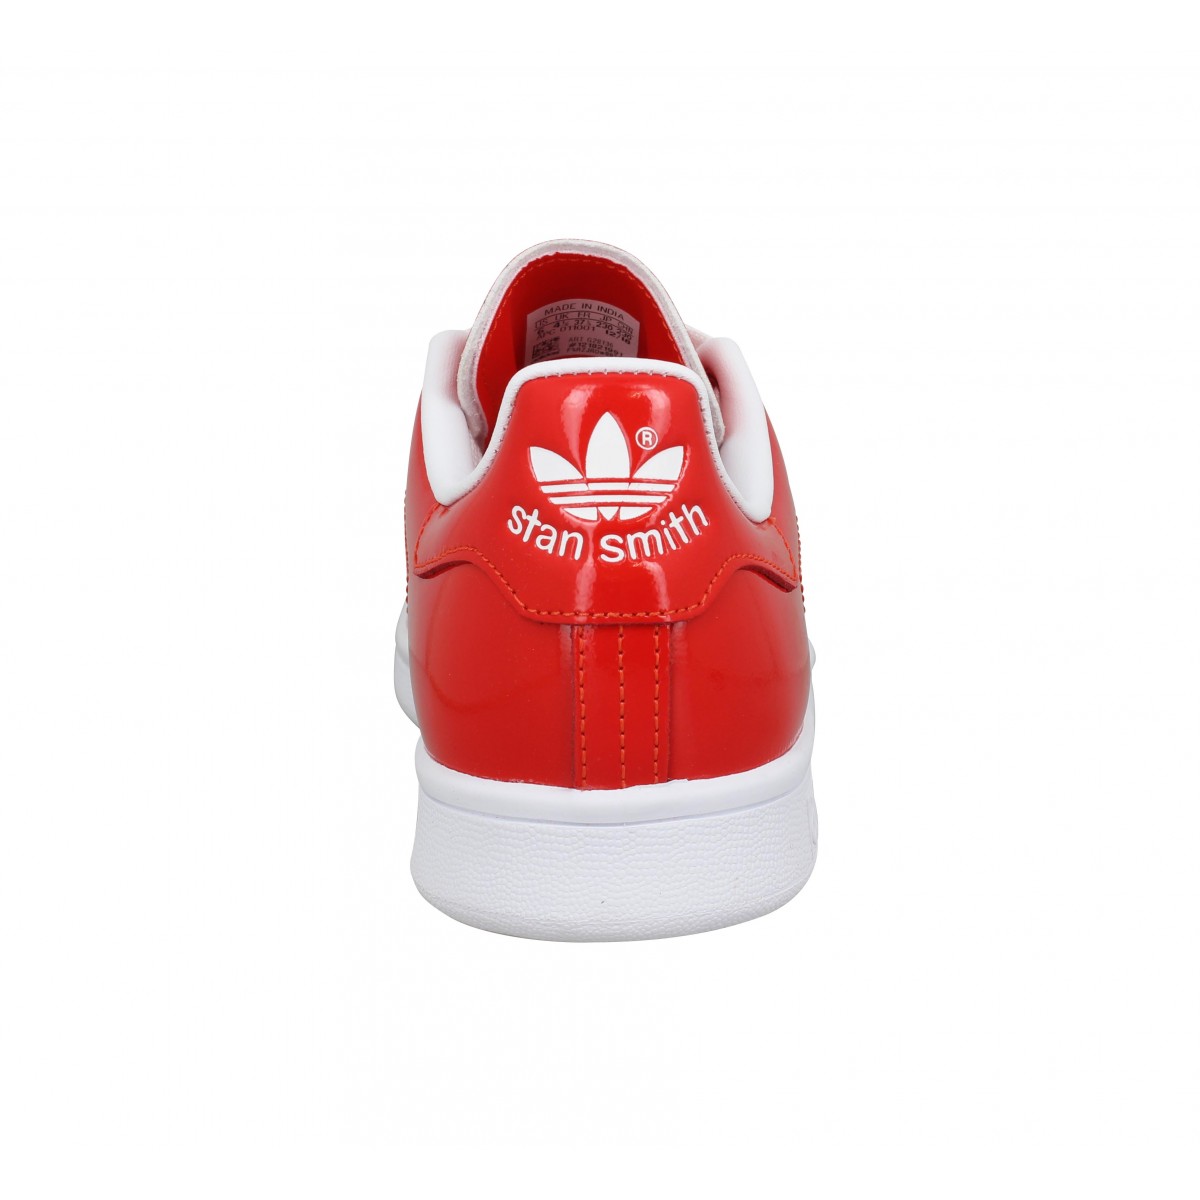 chaussures adidas rouge femme رسم الرياض